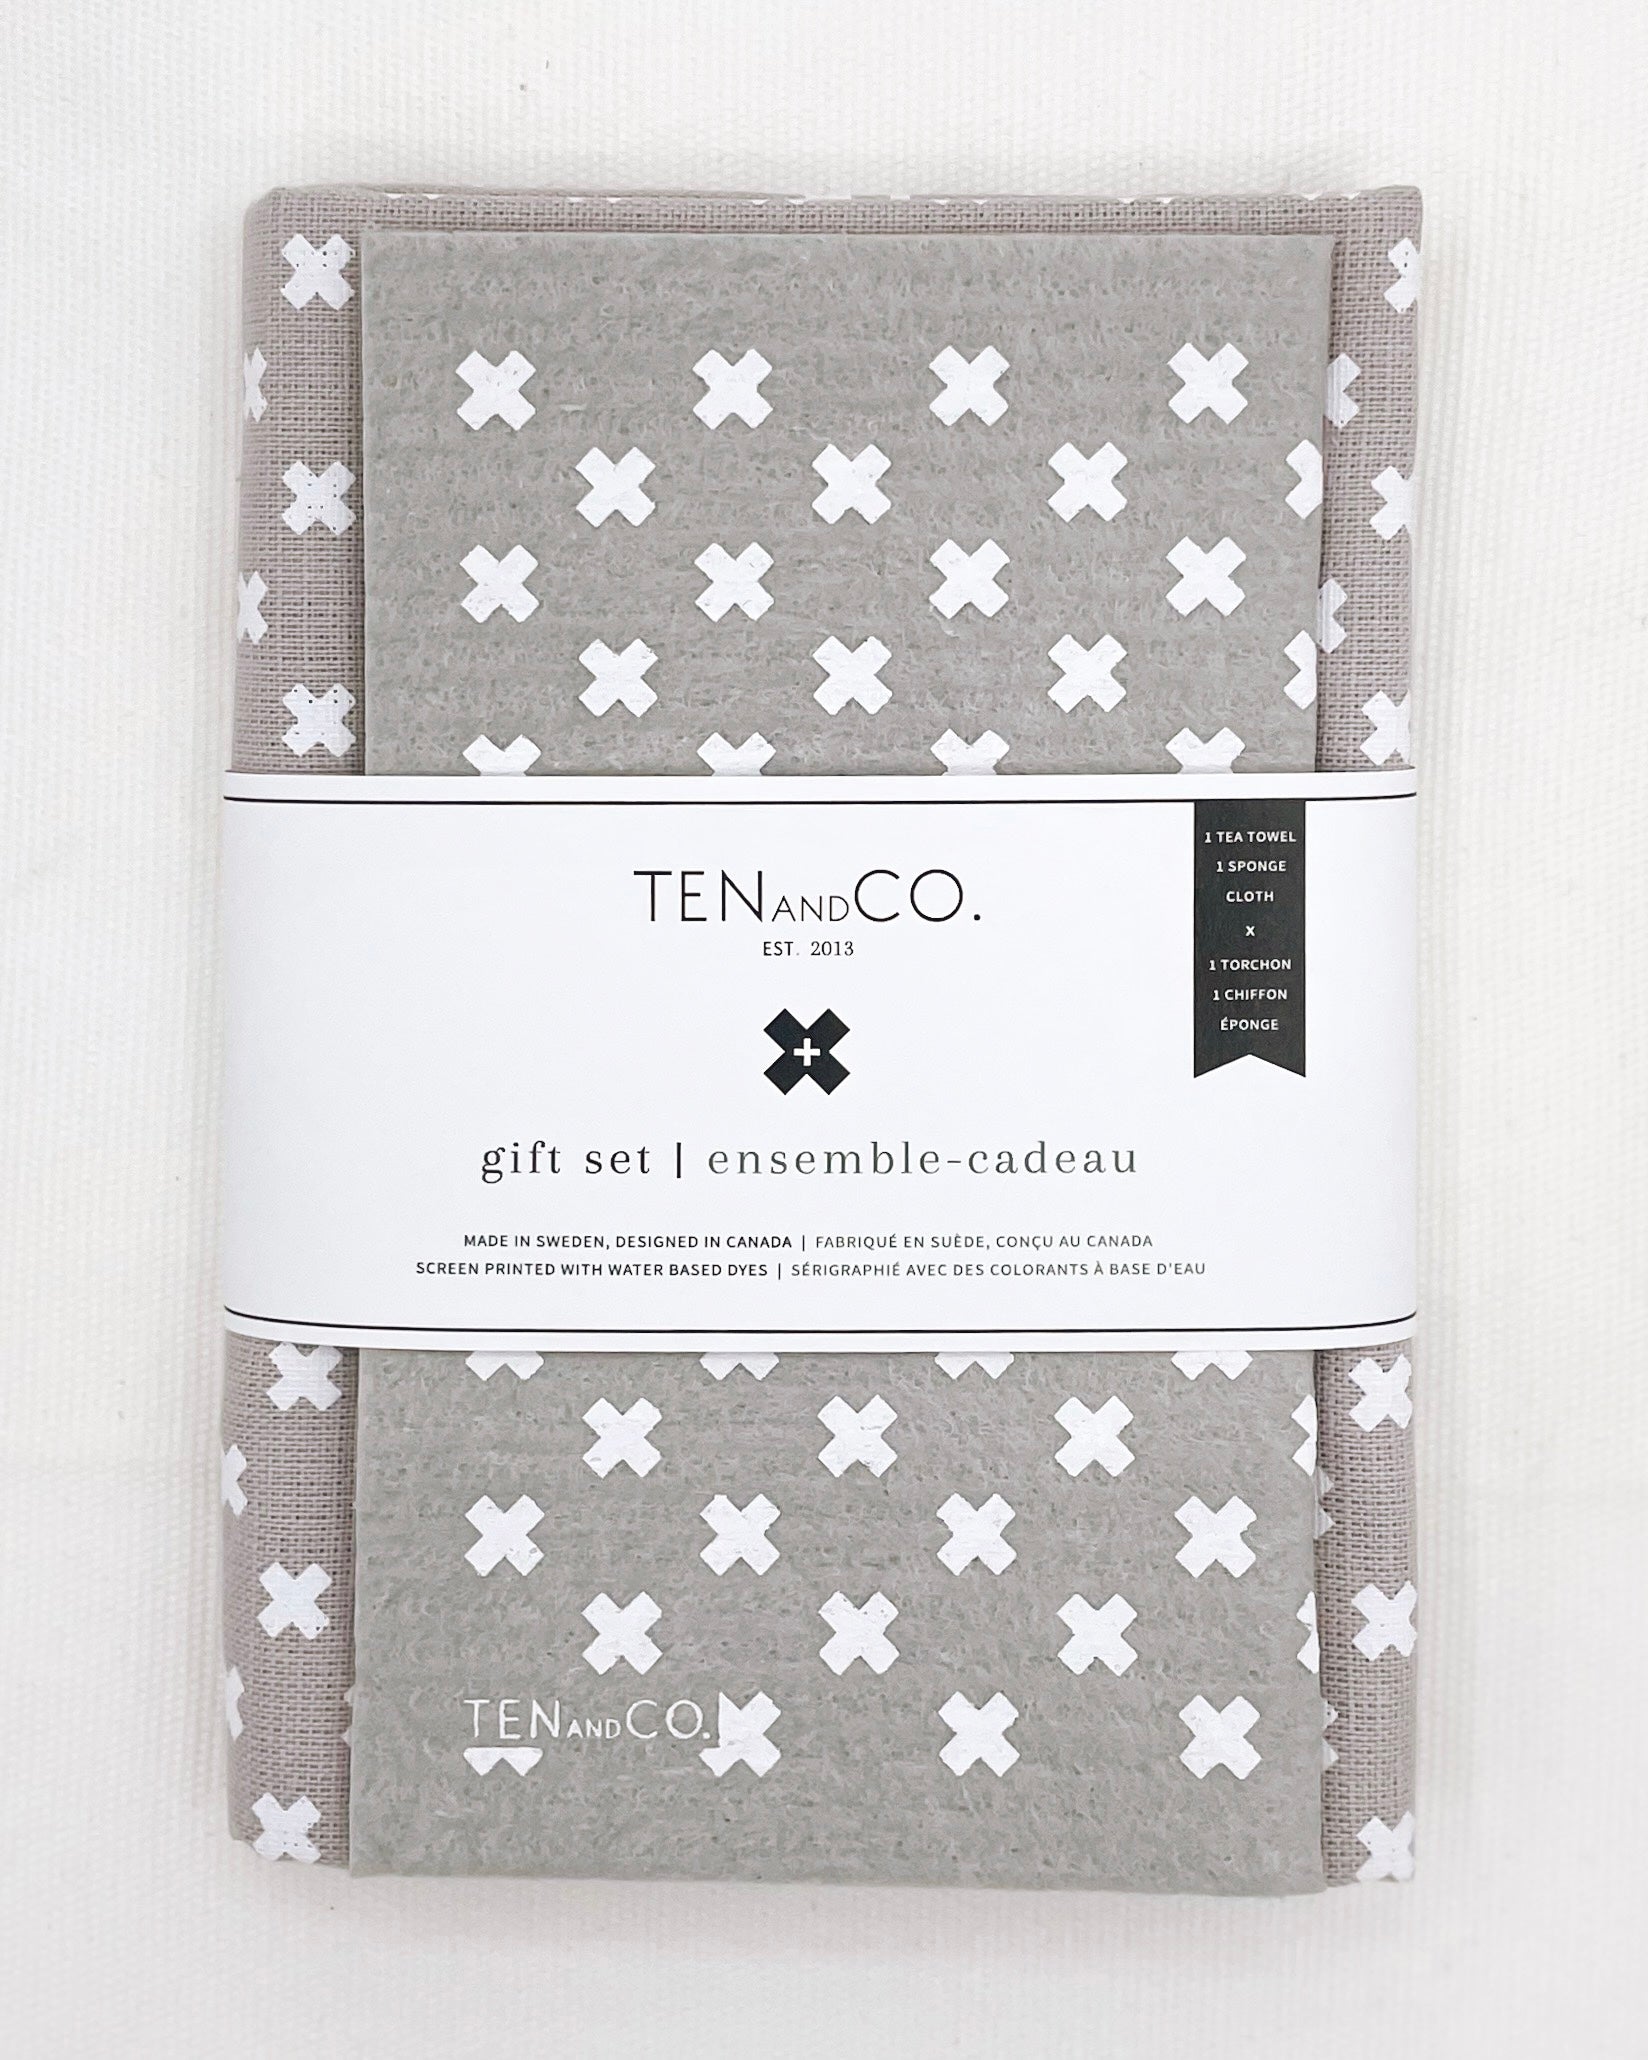 Flat lay image of Tiny X White on Warm Grey gift set on a white background. There is a Tiny X White on Warm Grey sponge cloth folded with a Tiny X White on Warm Grey tea towel behind it. There is a white belly band across both. The sponge cloth has a grey base with tiny x’s in white throughout. The tea towel has a grey base with tiny x’s in white throughout. The belly band has the Ten and Co. Logo and descriptive text in black font.